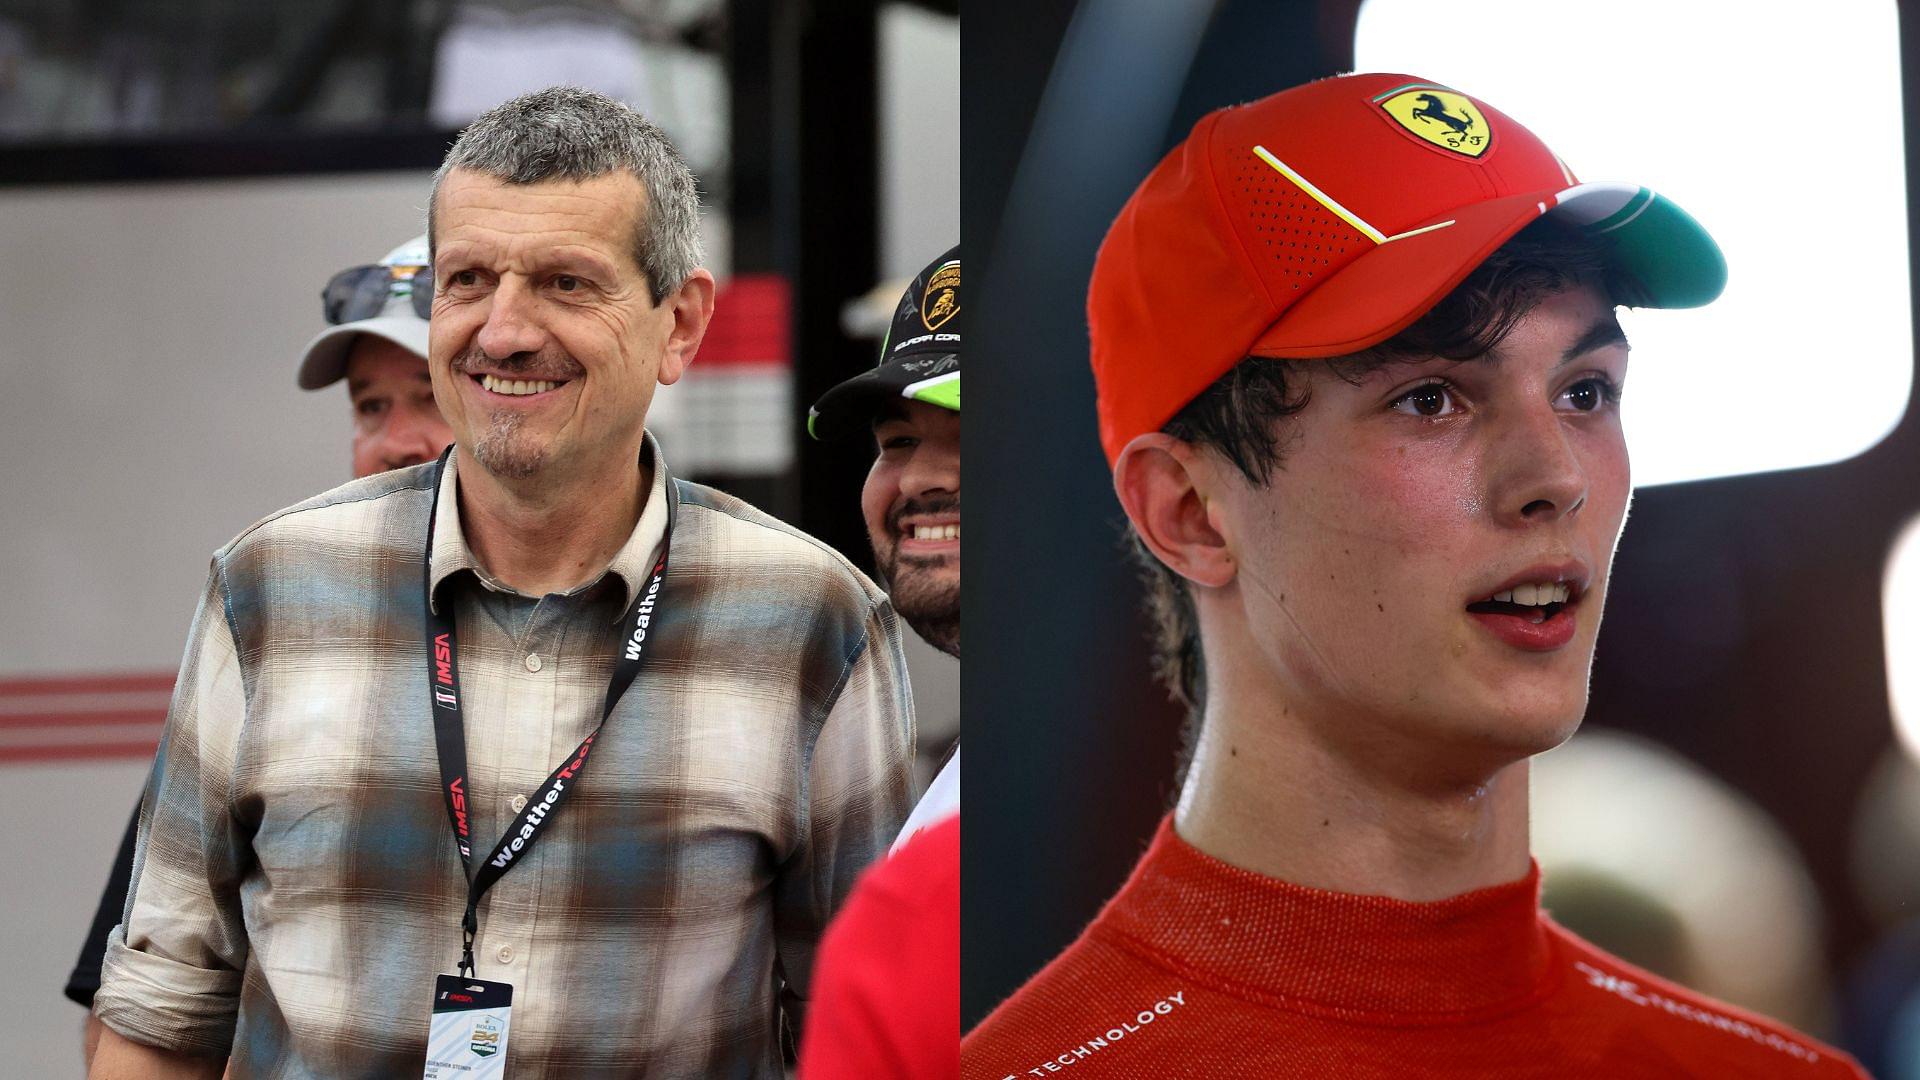 “I’d Put Him In”: Guenther Steiner Would Have Hired Oliver Bearman for 2025 if He Was Still the Haas Boss